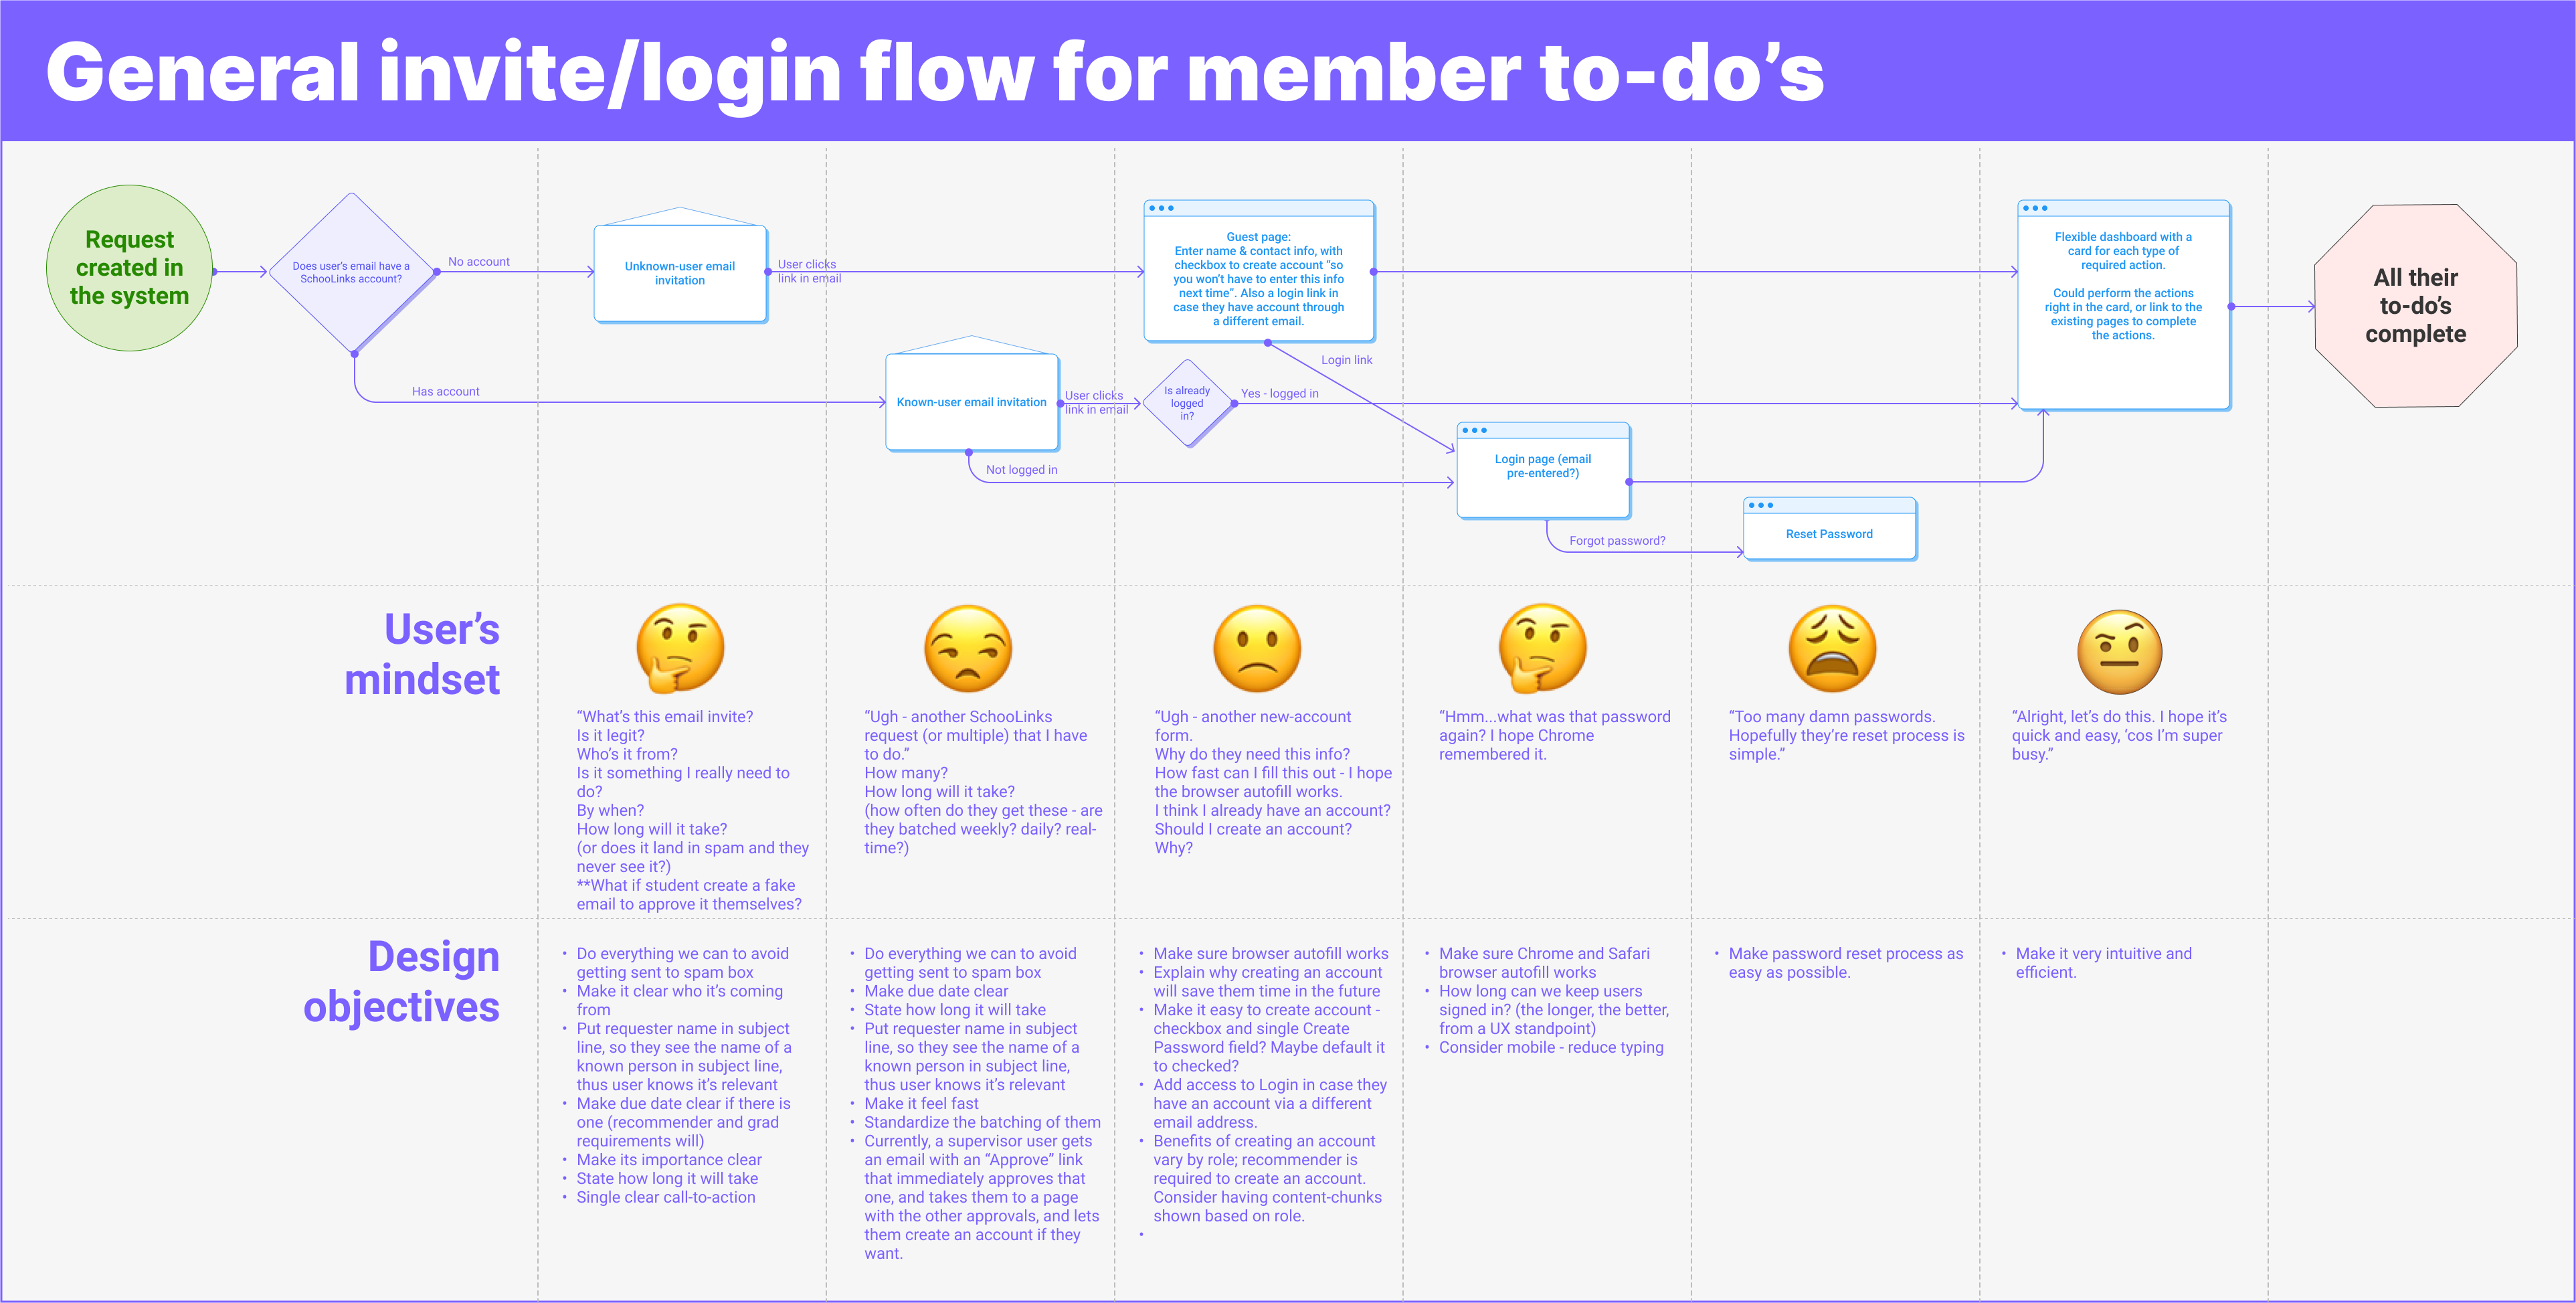 A flow map showing member onboarding overlaid with their mindset and resulting design objectives.